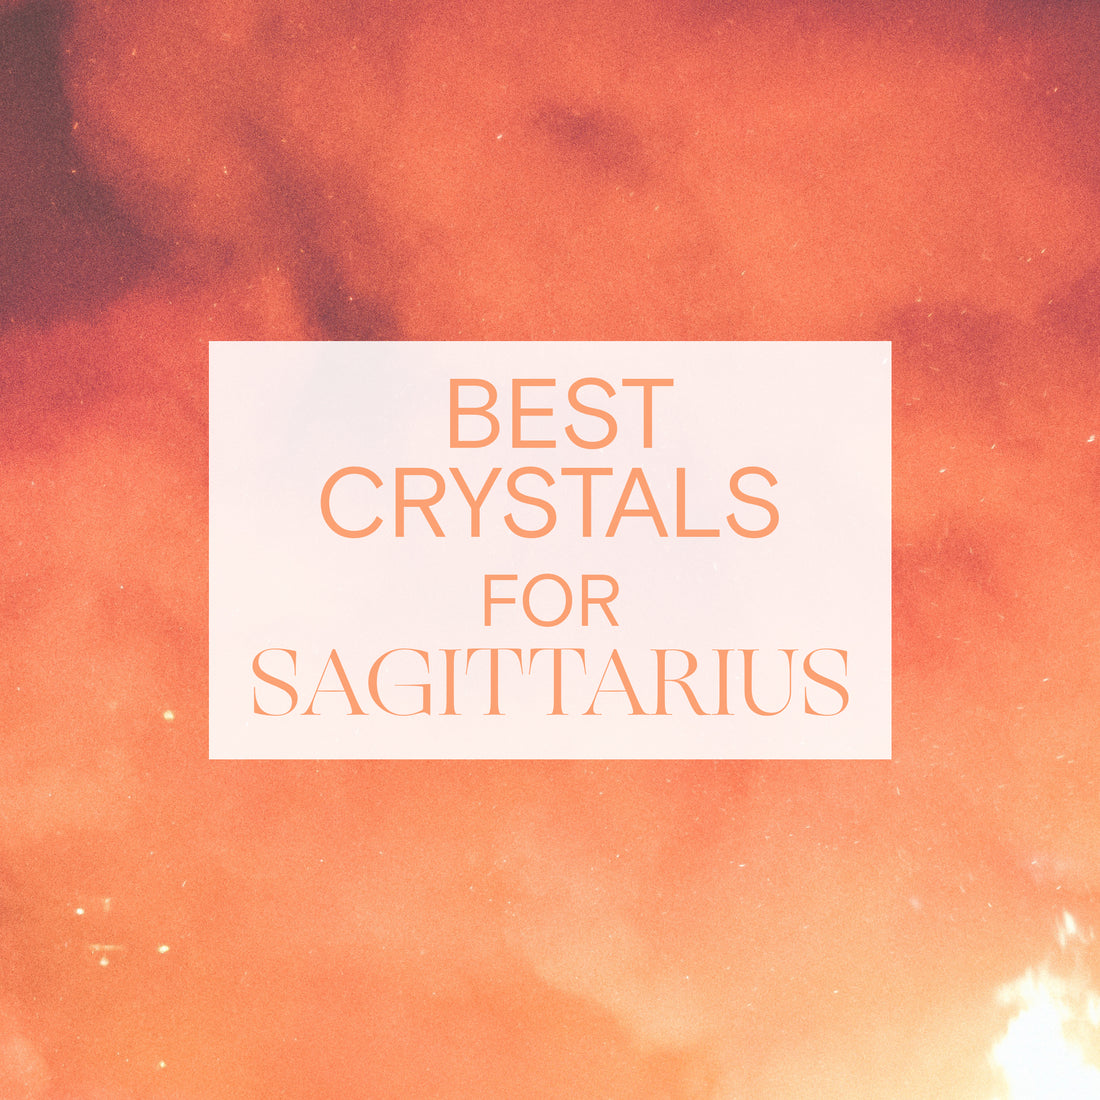 7 of the Best Crystals for Sagittarius